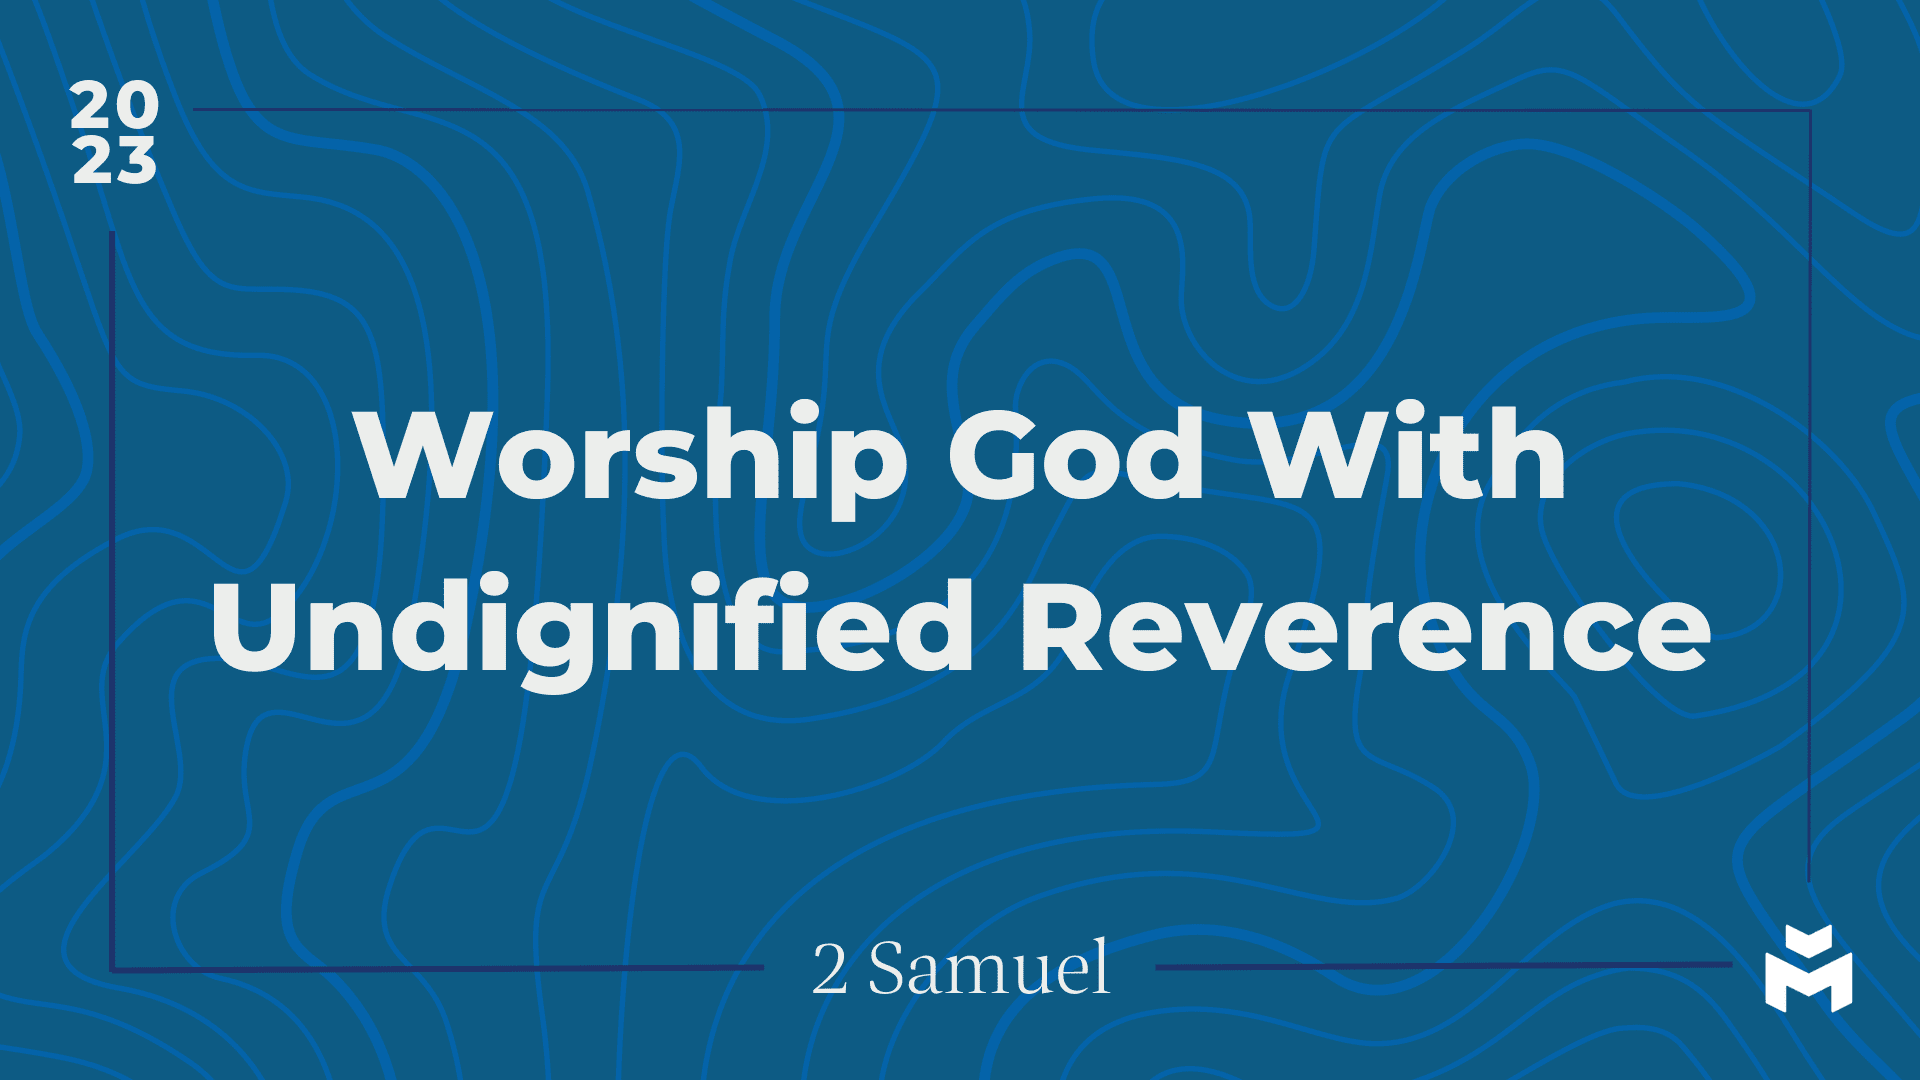 Worship God With Undignified Reverence